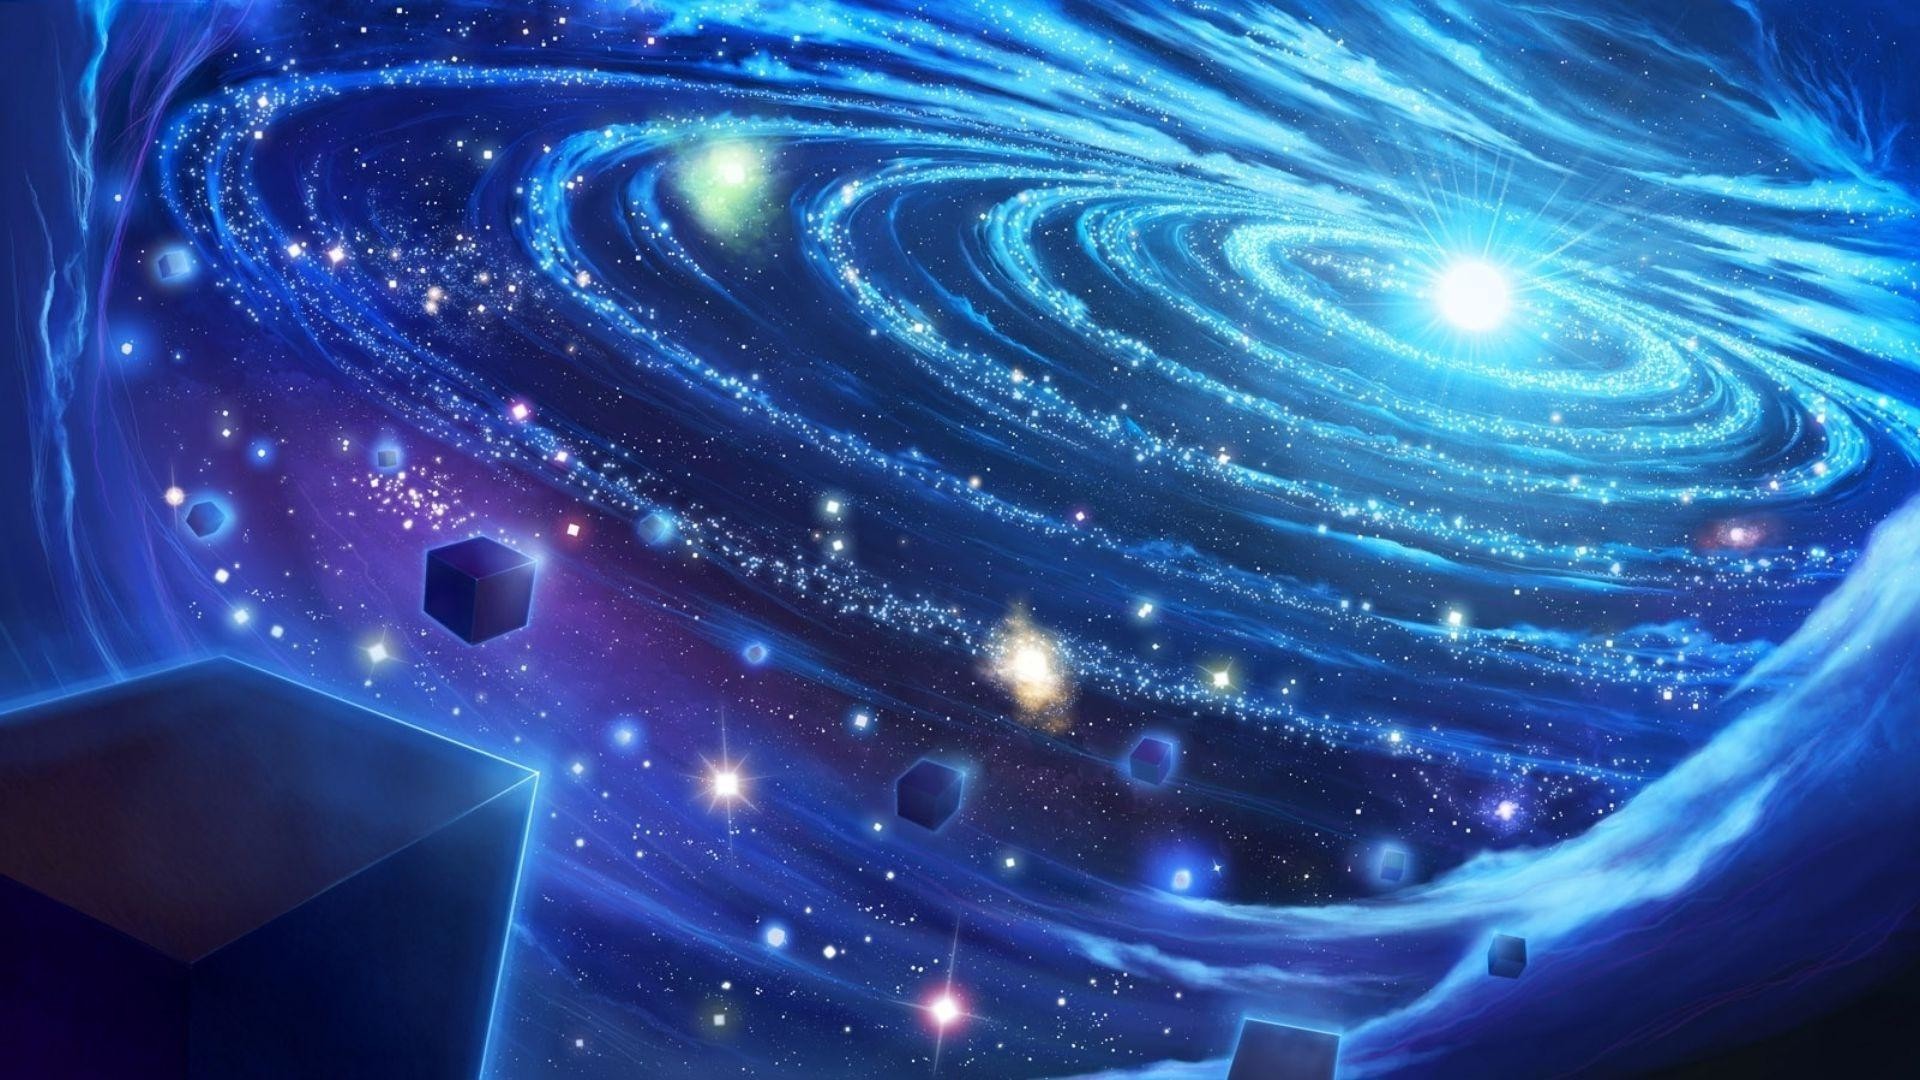 1920x1080 Light in the blue galaxy wallpaper Space wallpapers